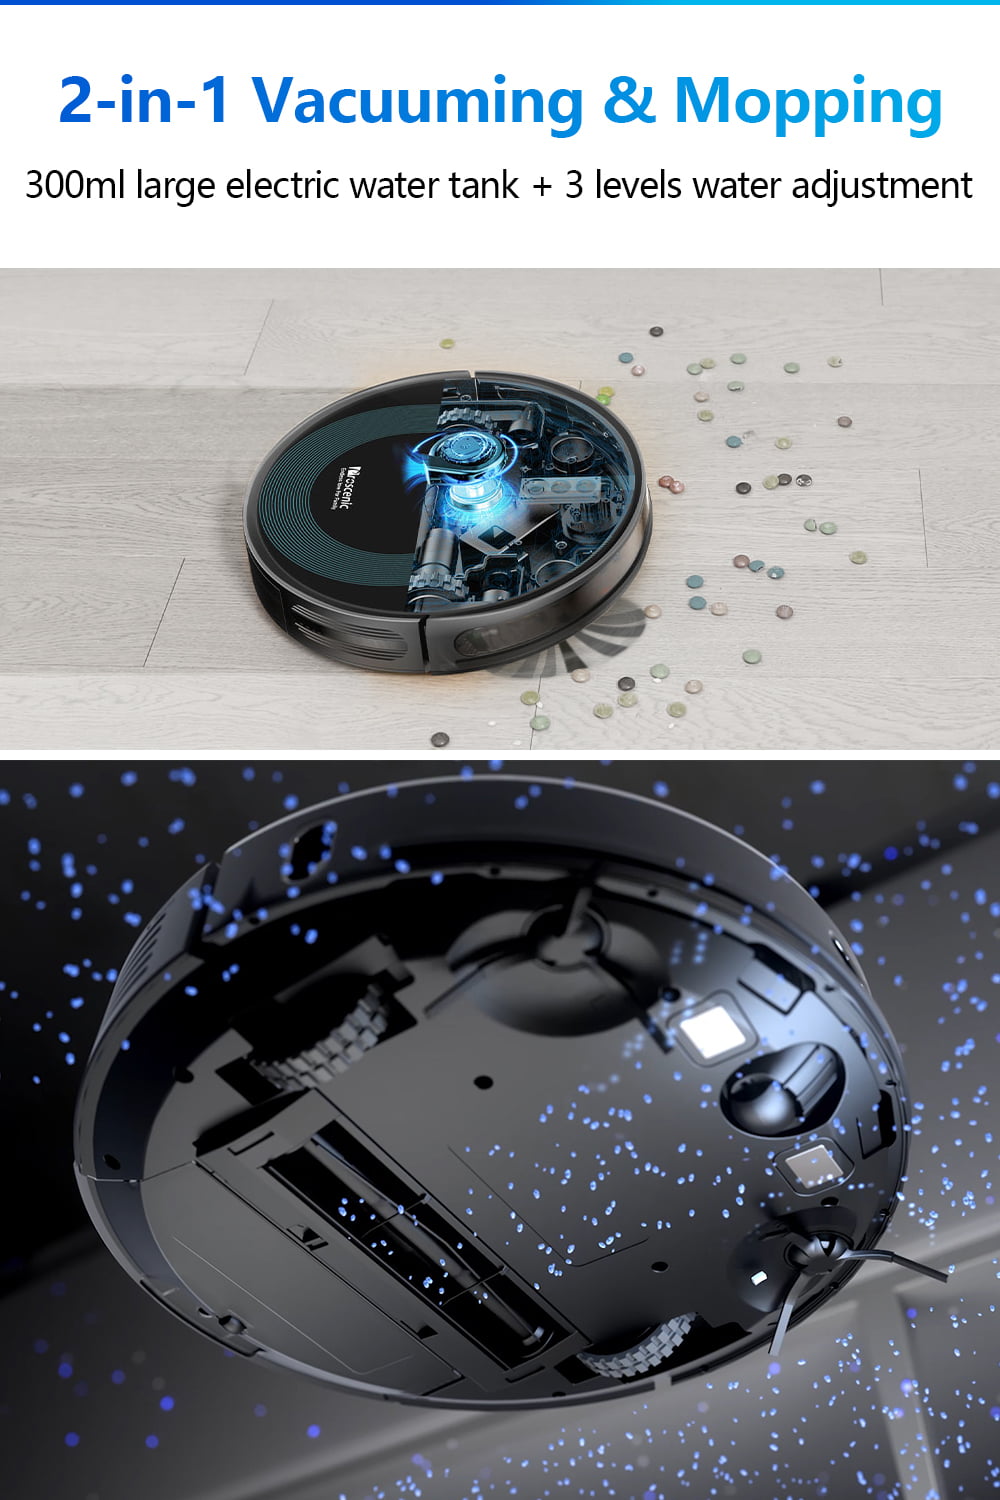 Proscenic 850T Wi-Fi Connected Robot Vacuum Cleaner with Gyro